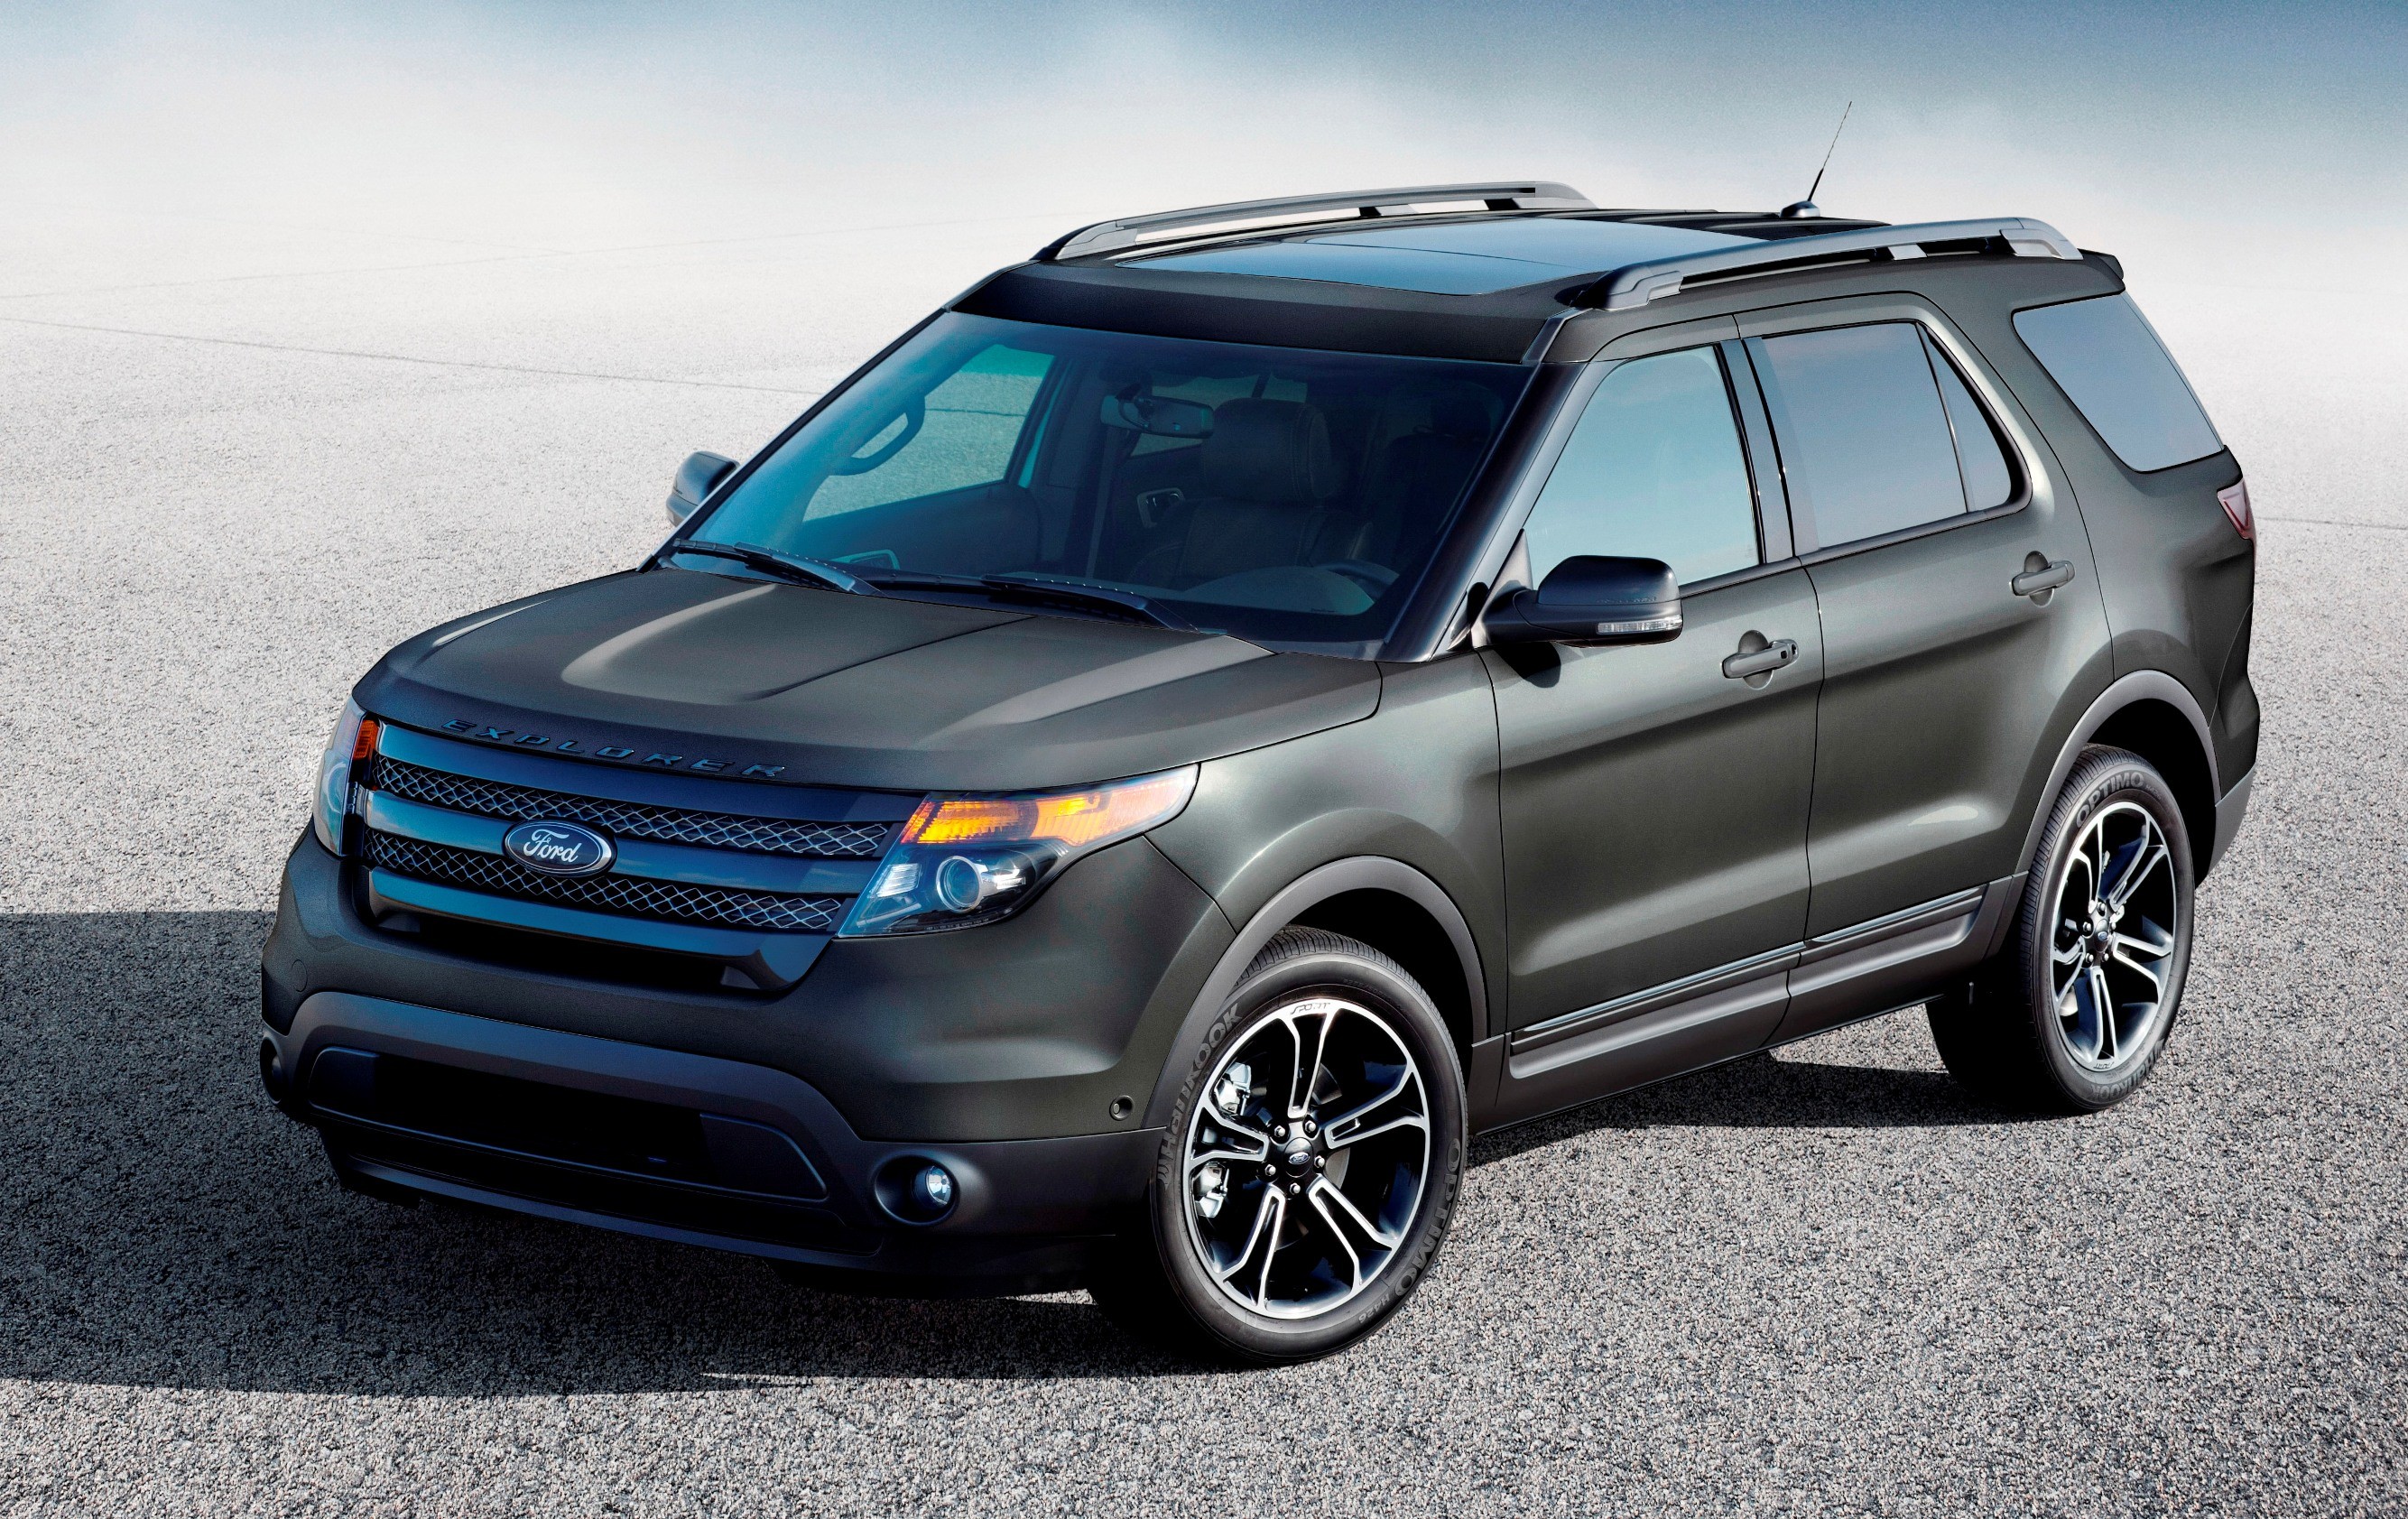 2015 Ford Explorer XLT Appearance Pack Adds 2.0L Turbo, Big Wheels and